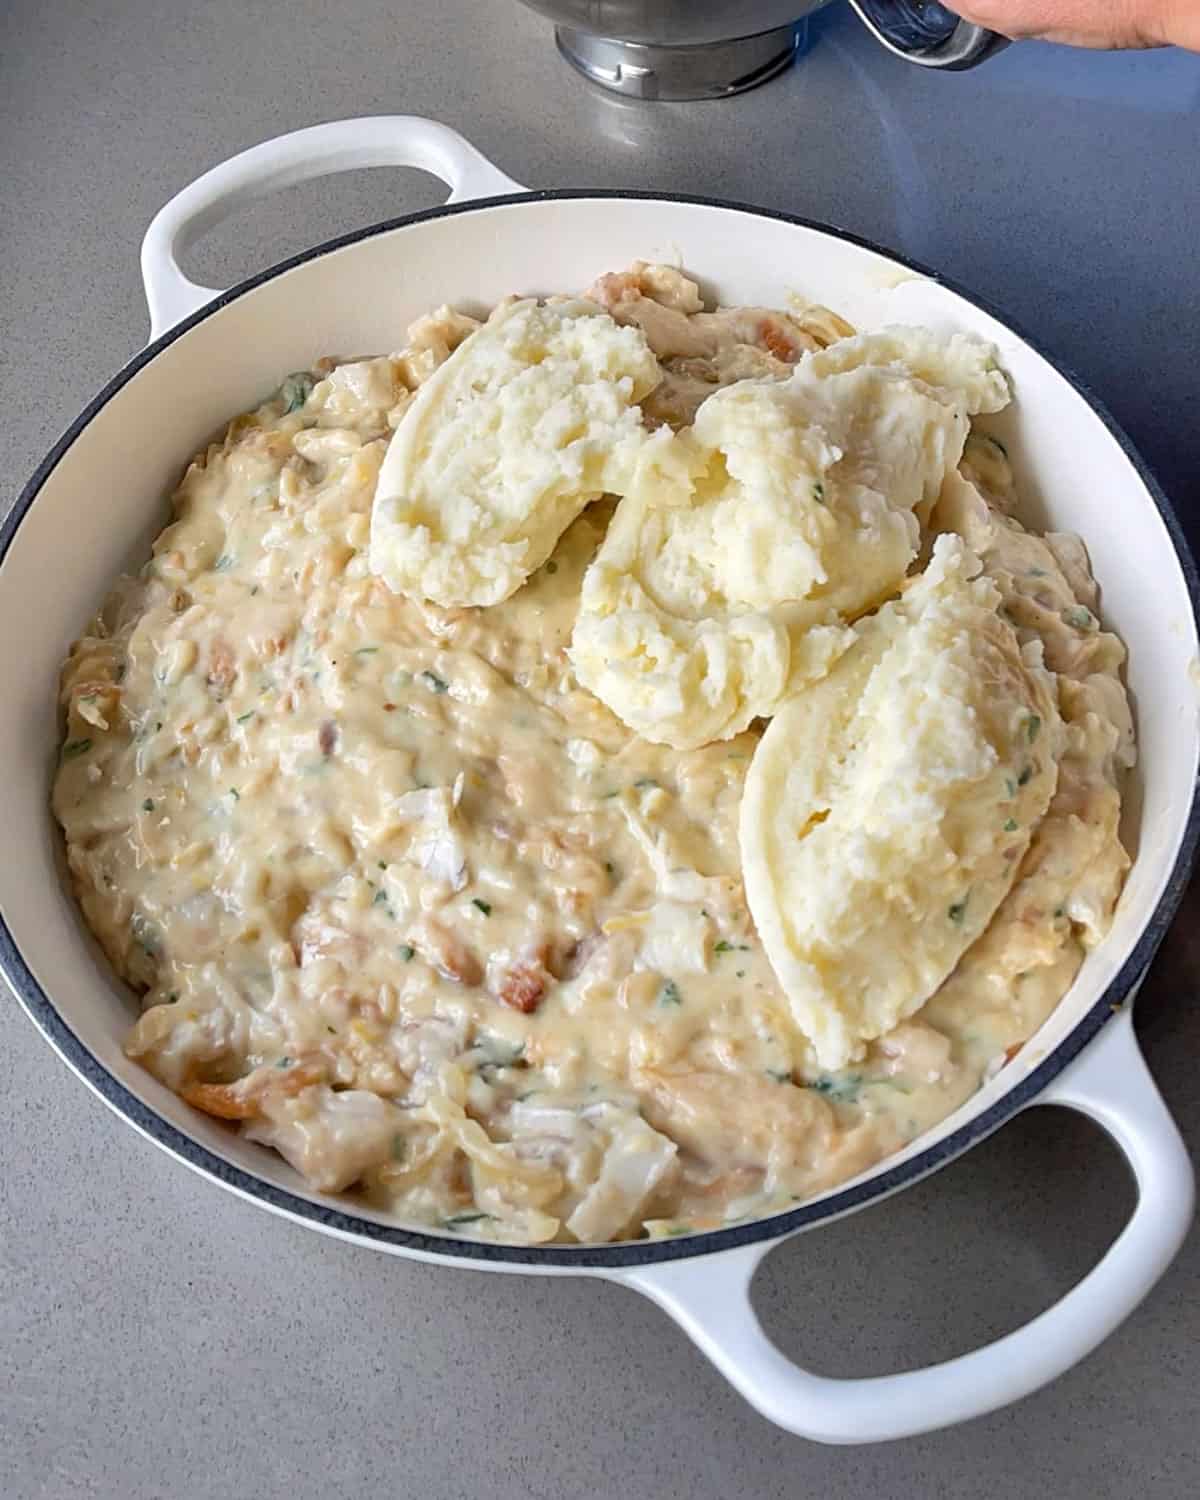 Smoked fish pie in a caseerole dish with mashed potato being spooned on top.